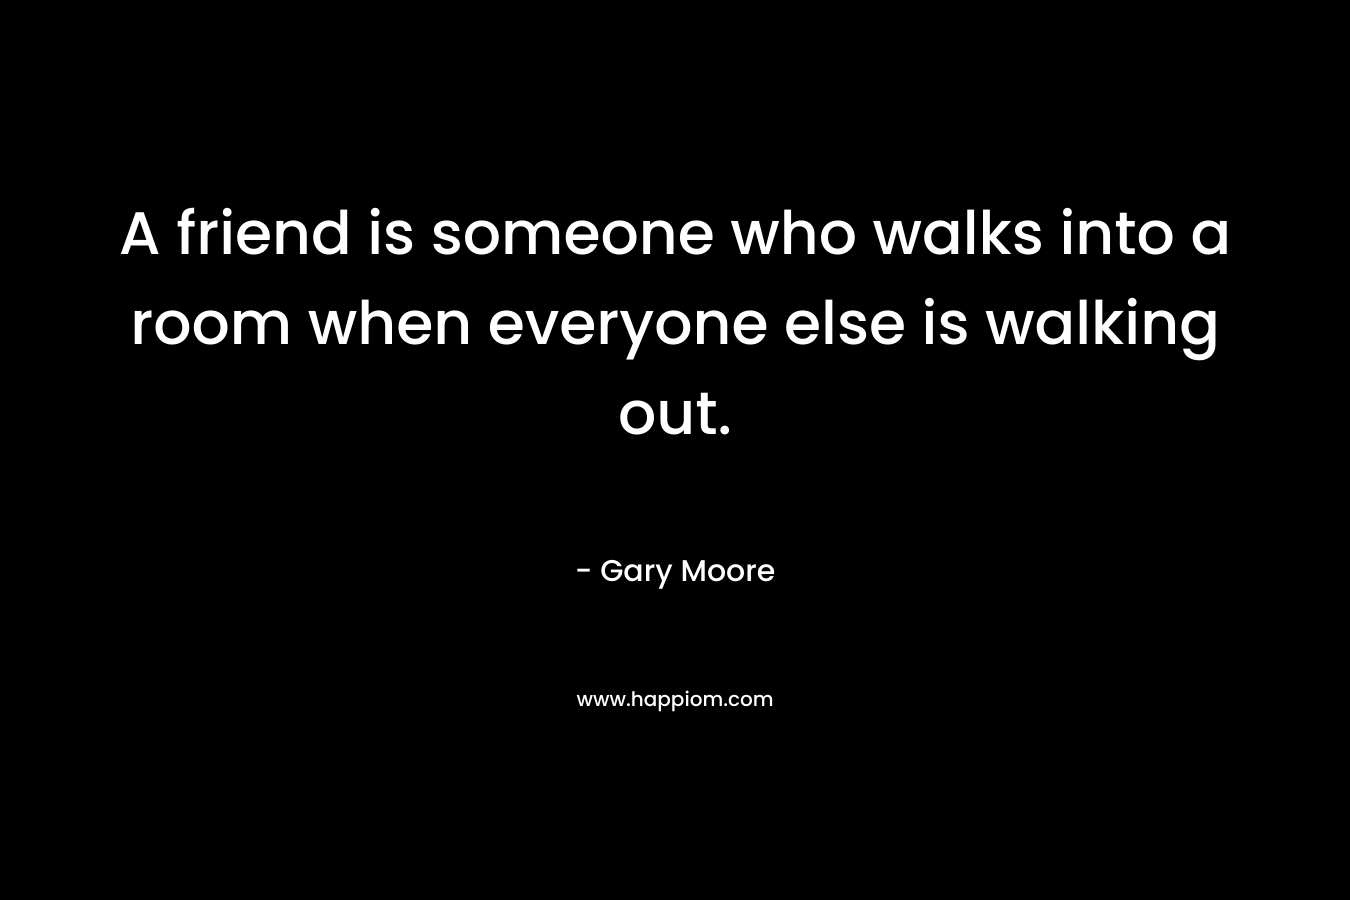 A friend is someone who walks into a room when everyone else is walking out.